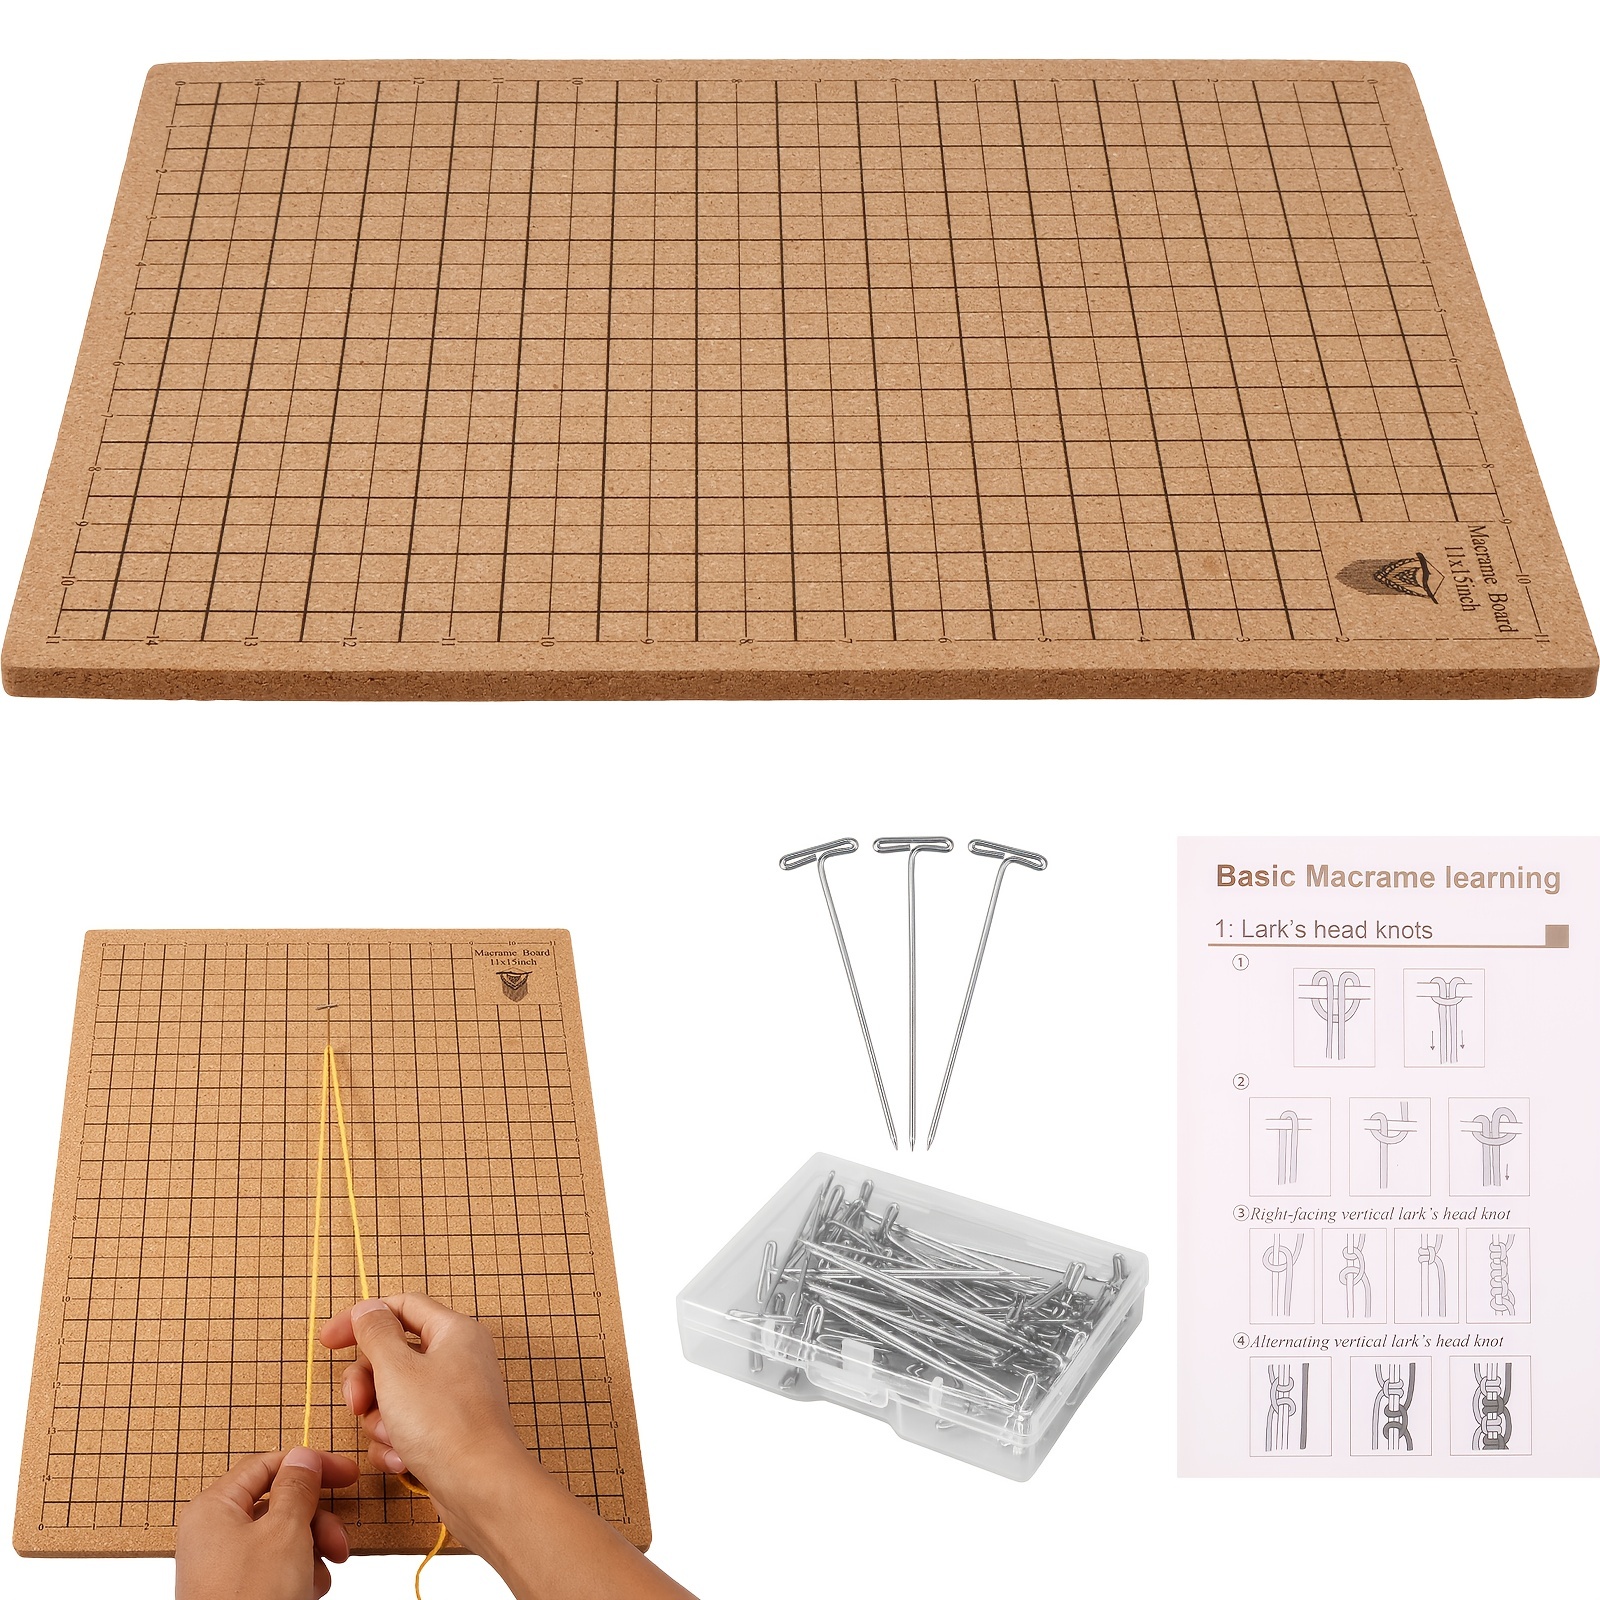 Macrame Board Double-Sided Grids Large Cork Board for Bracelet Project with  Instructions (8x8 inch)